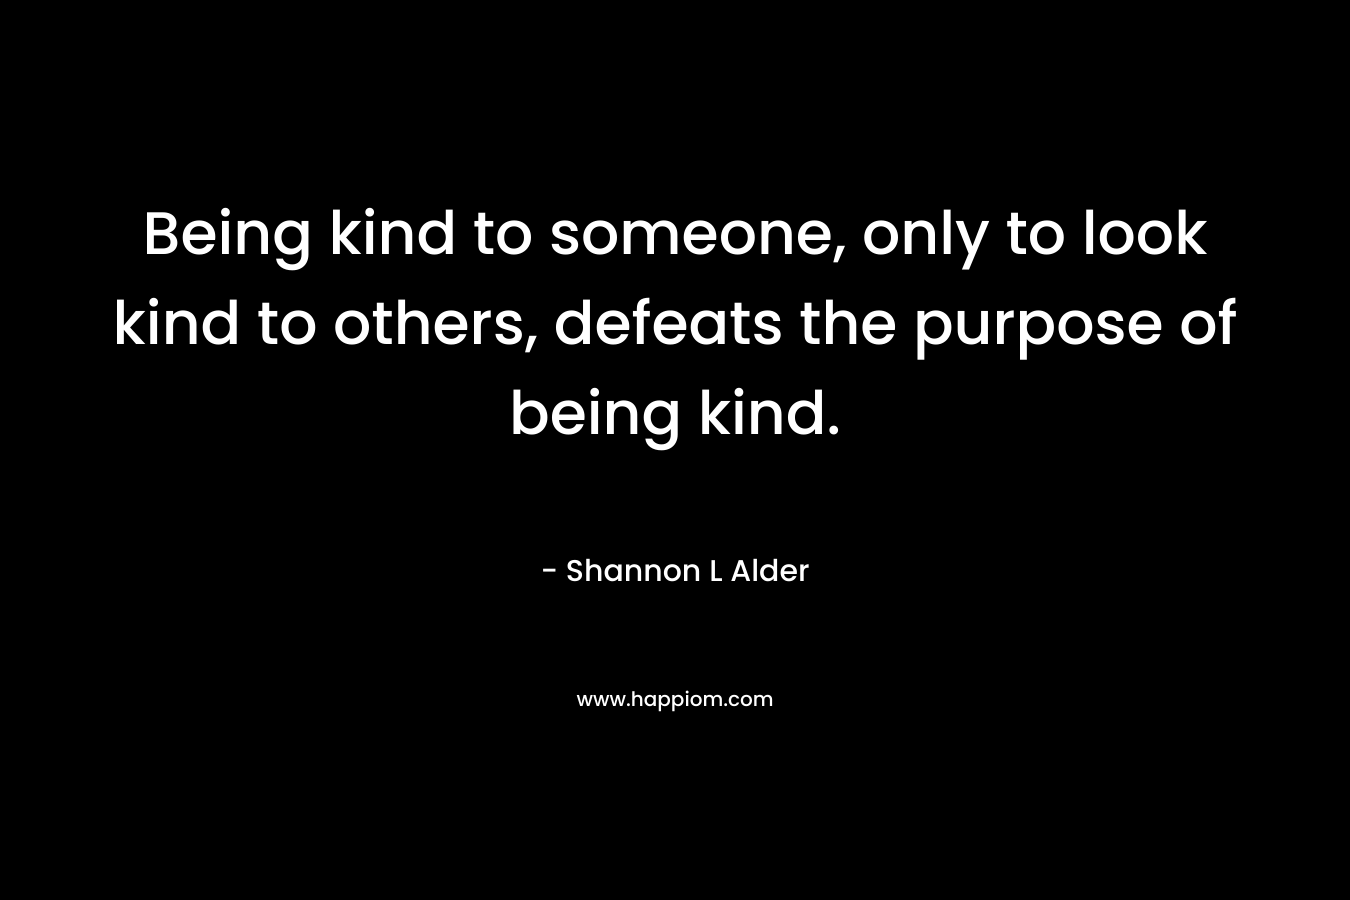 Being kind to someone, only to look kind to others, defeats the purpose of being kind. – Shannon L Alder